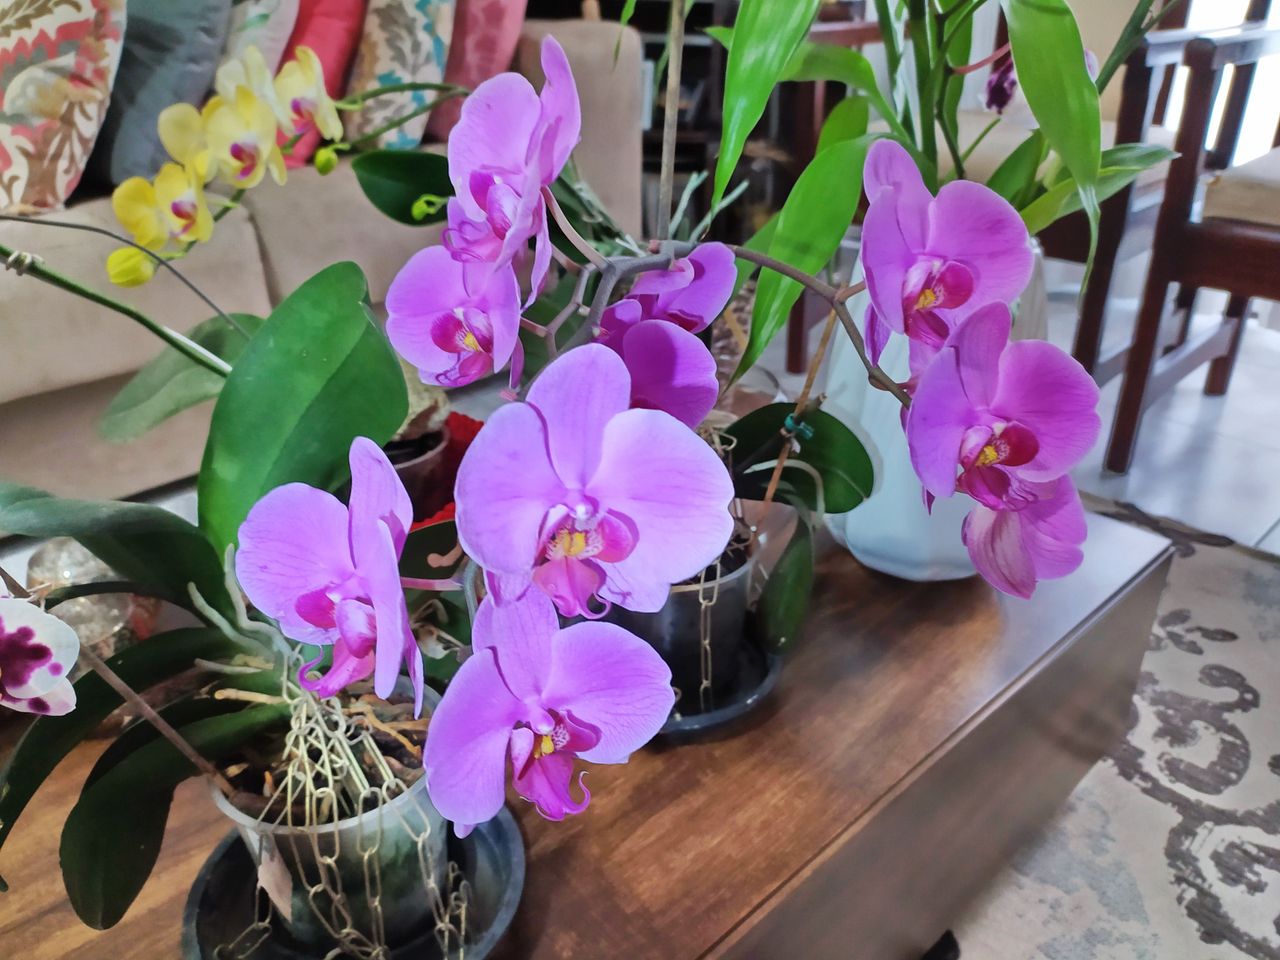 Mix with water and water your orchid. It will be teeming with flowers